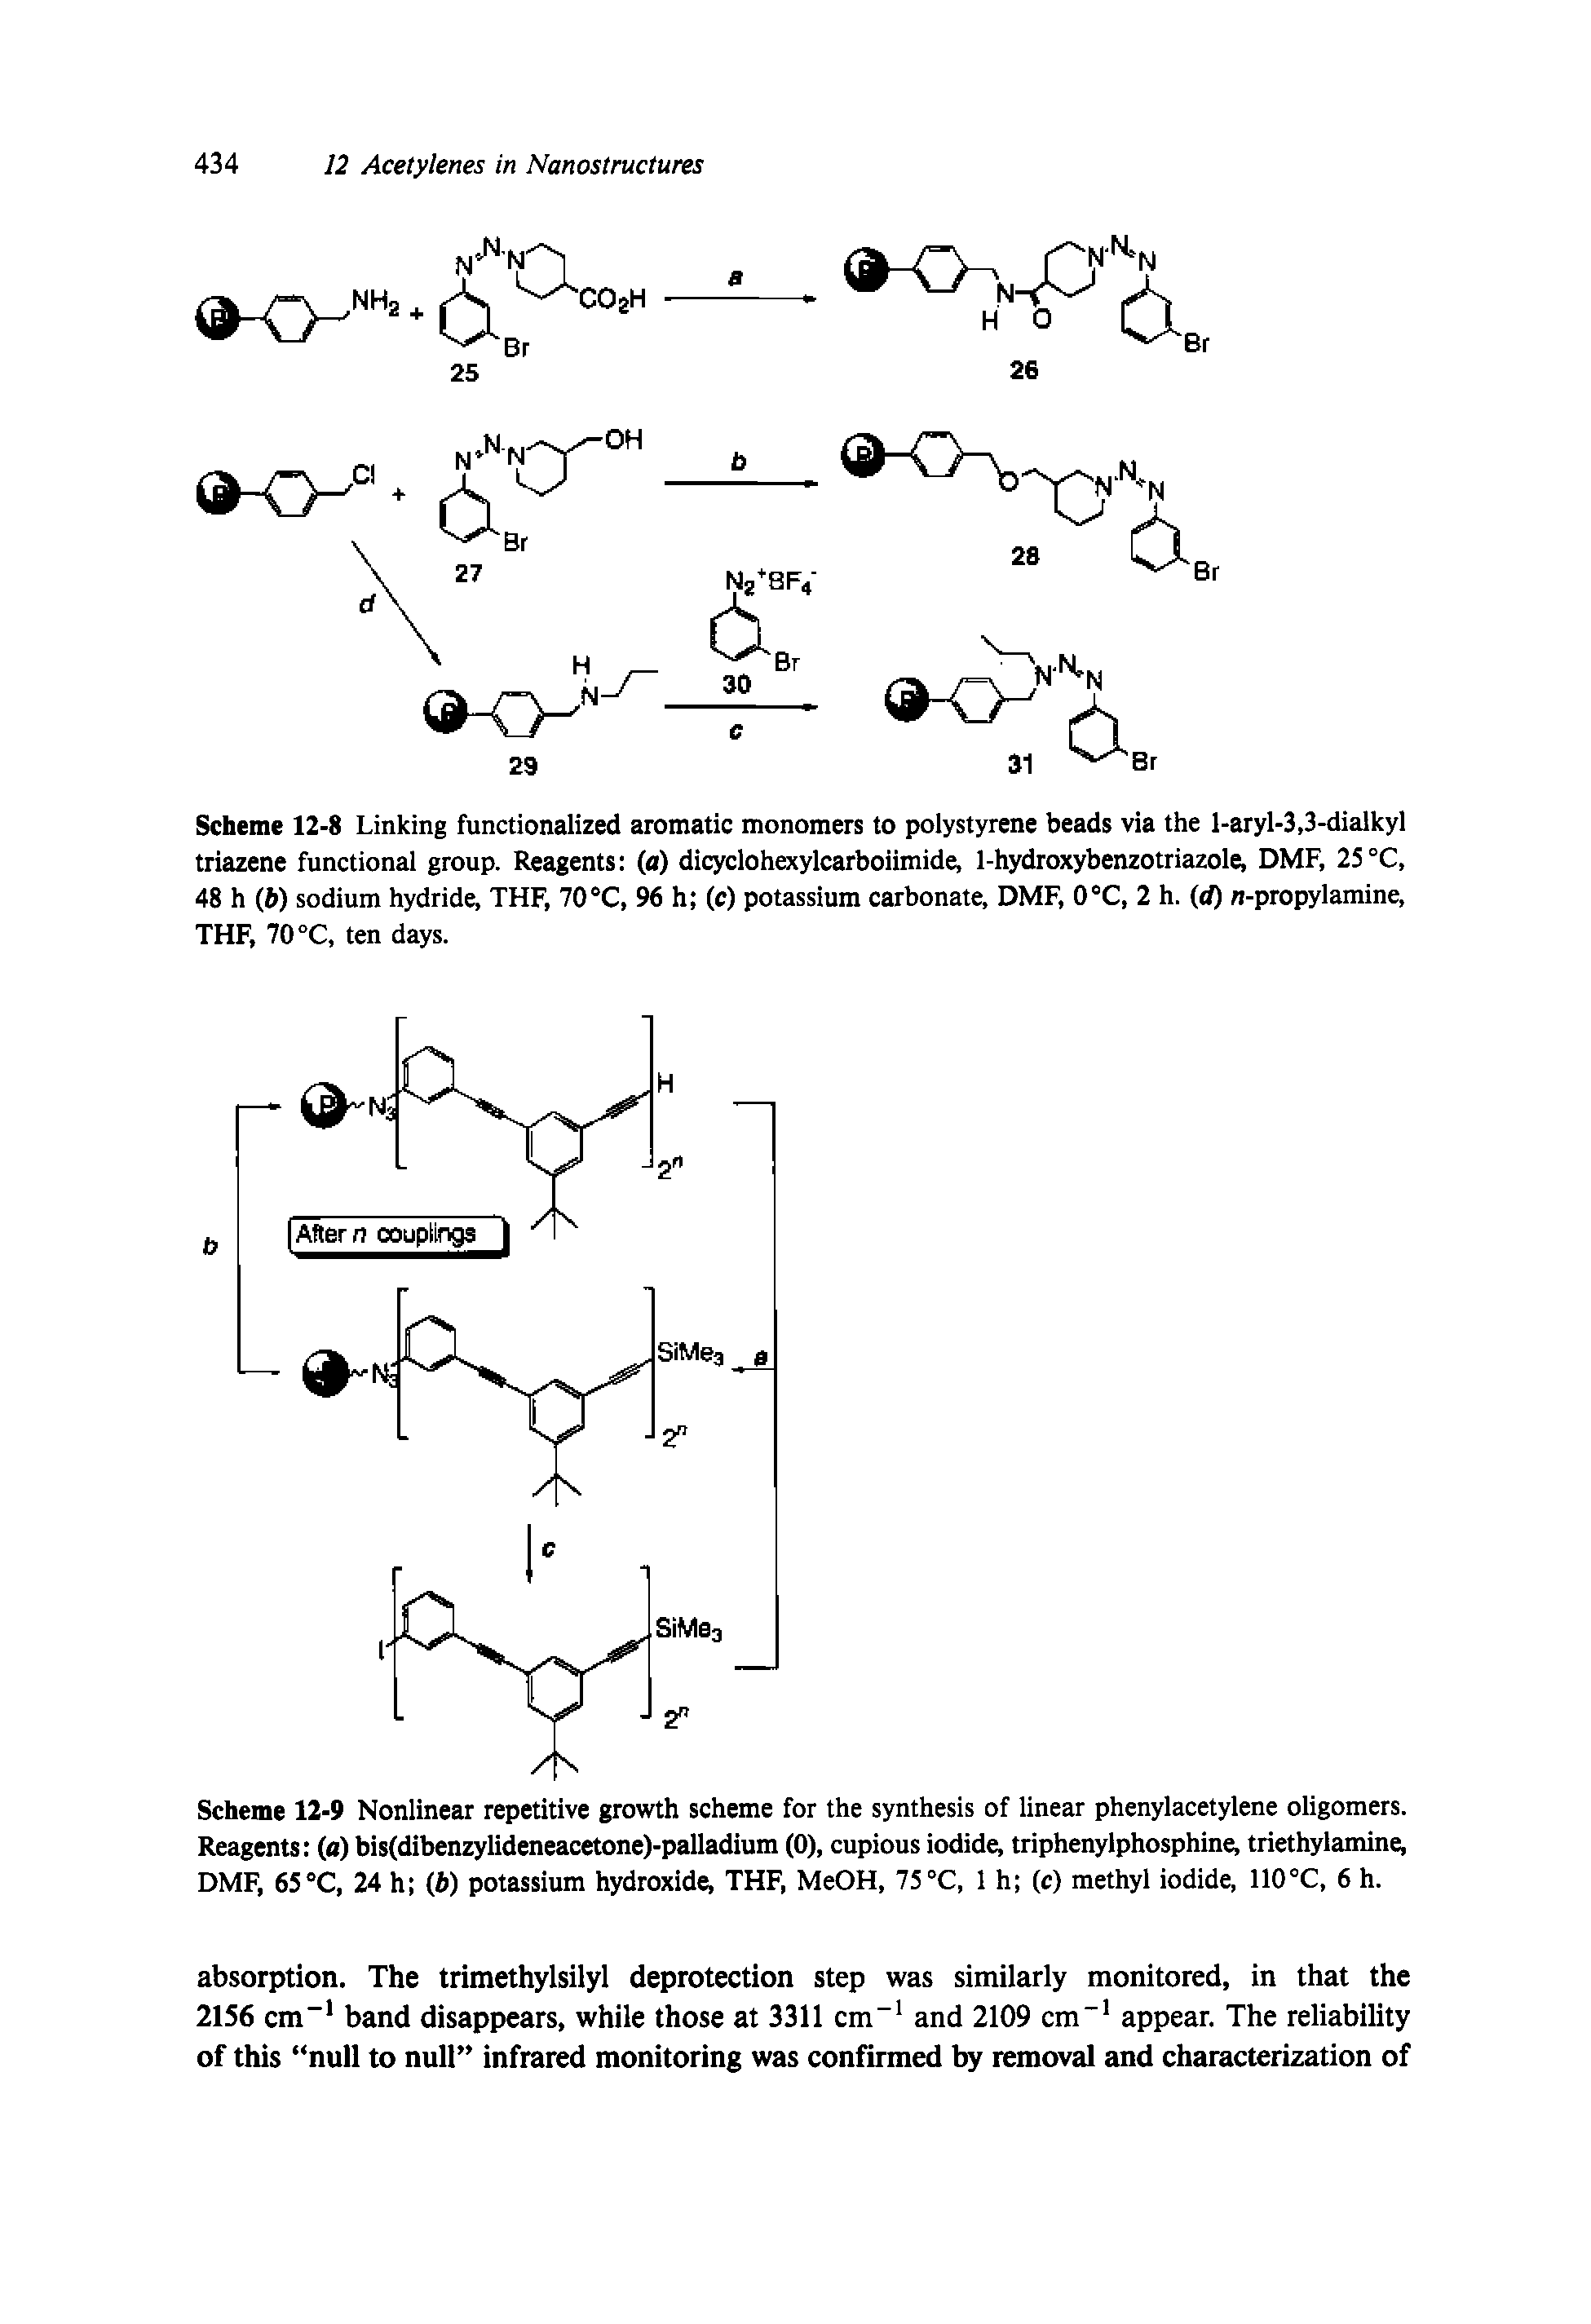 Scheme 12-8 Linking functionalized aromatic monomers to polystyrene beads via the l-aryl-3,3-dialkyl triazene functional group. Reagents (a) dicyclohexylcarboiimide, 1-hydroxybenzotriazole, DMF, 25 °C, 48 h (b) sodium hydride, THF, 70 °C, 96 h (c) potassium carbonate, DMF, 0°C, 2 h. (d) n-propylamine, THF, 70 °C, ten days.